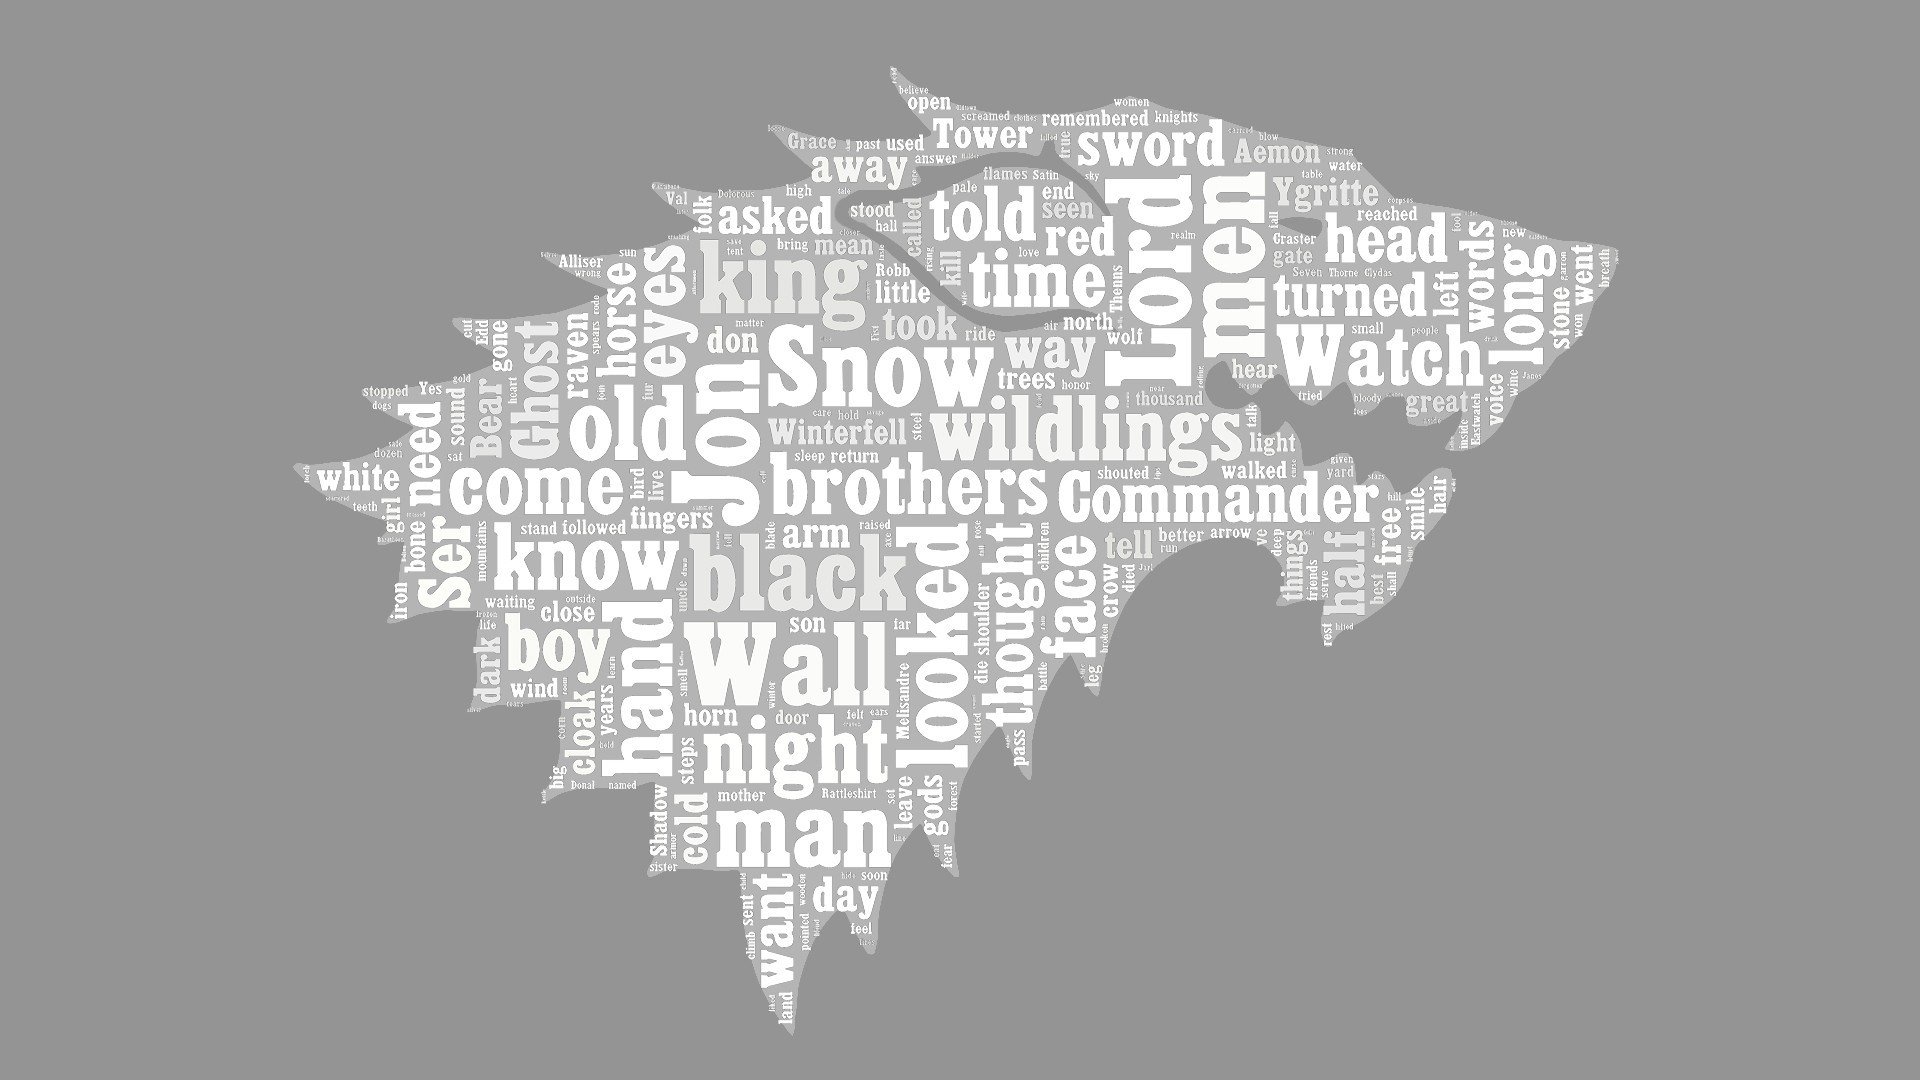 Game of Thrones, A Song of Ice and Fire Wallpaper